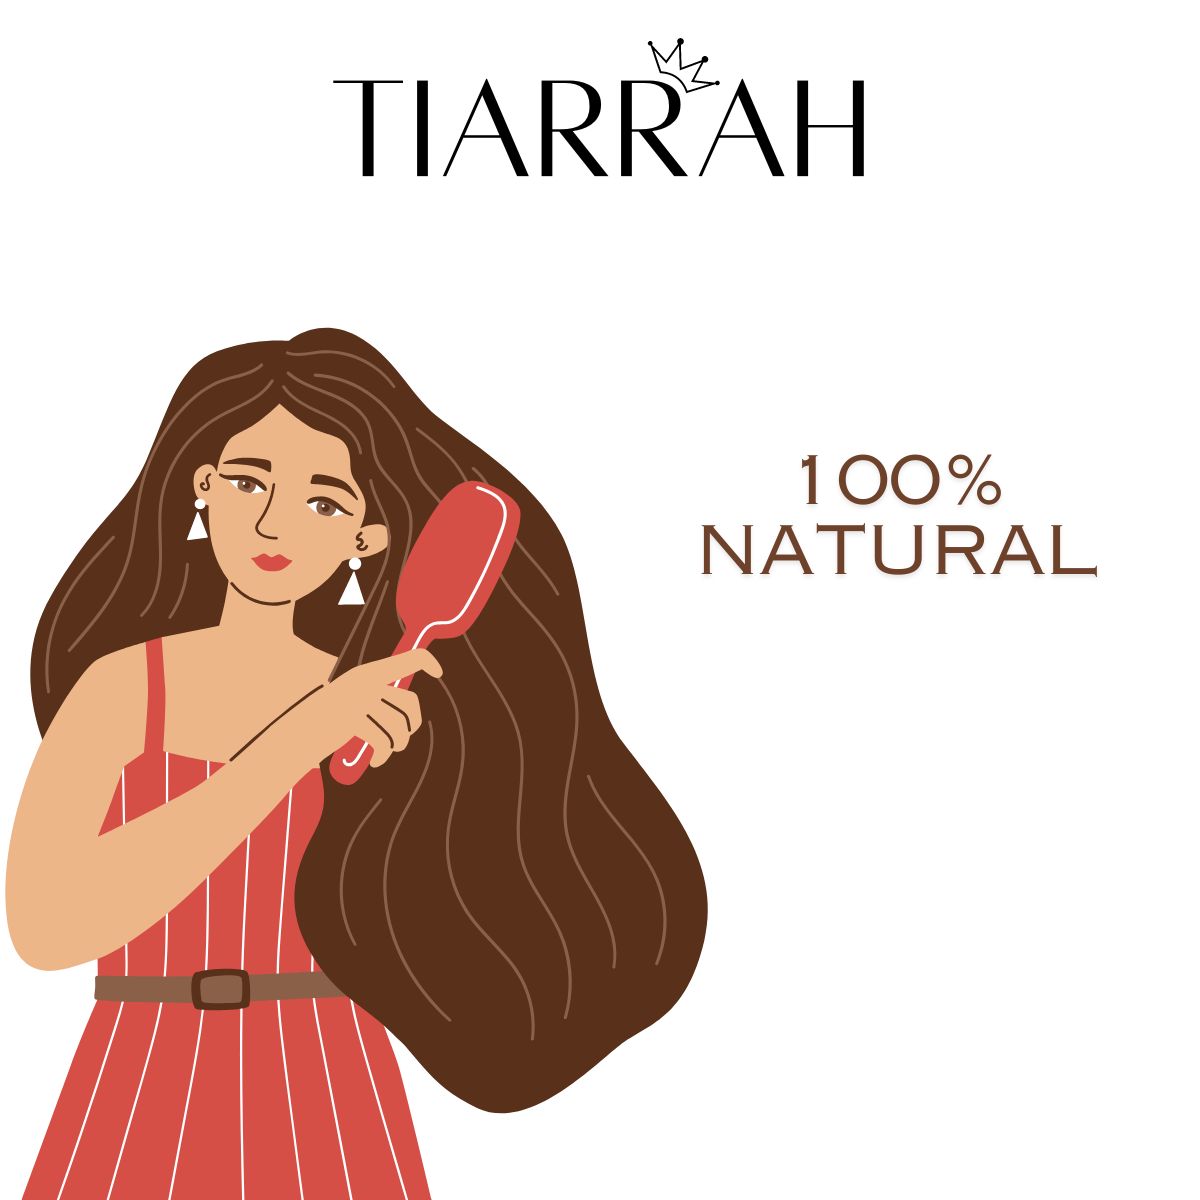 Tiarrah's Hair Butter: Natural & Non-Toxic - The Luxury Bath and Body Care Shop